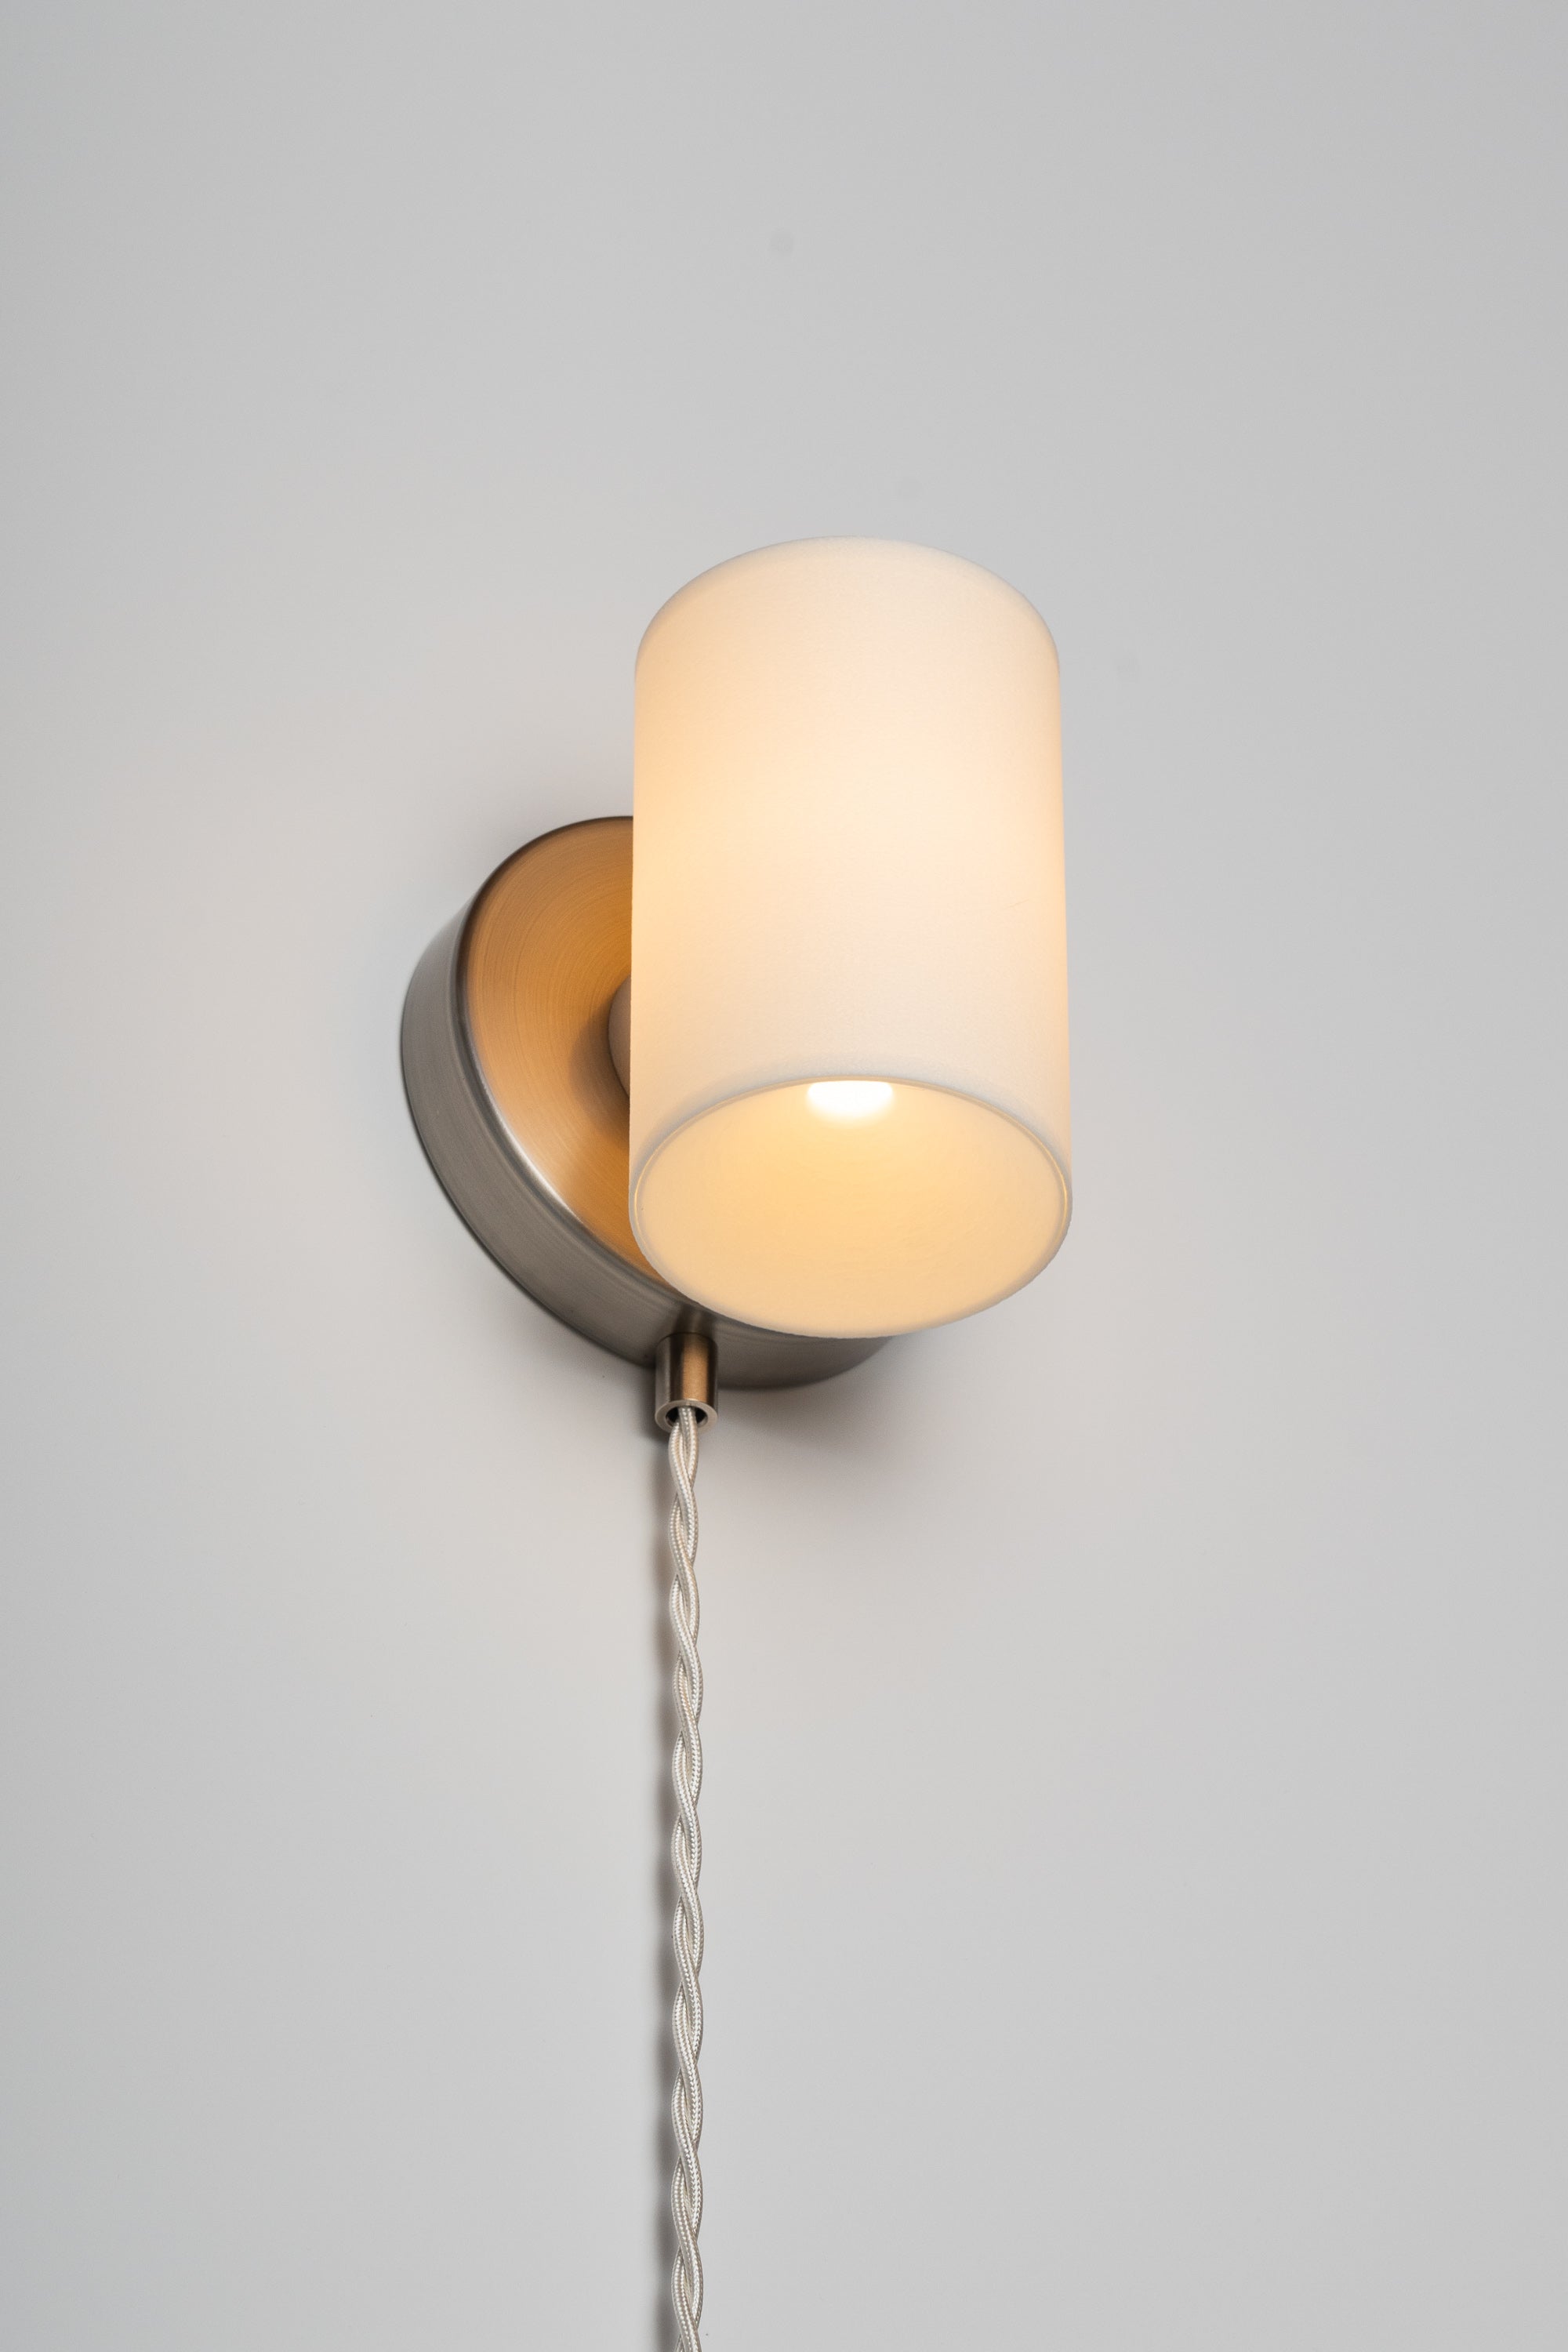 CY Sconce Wired Plug-in